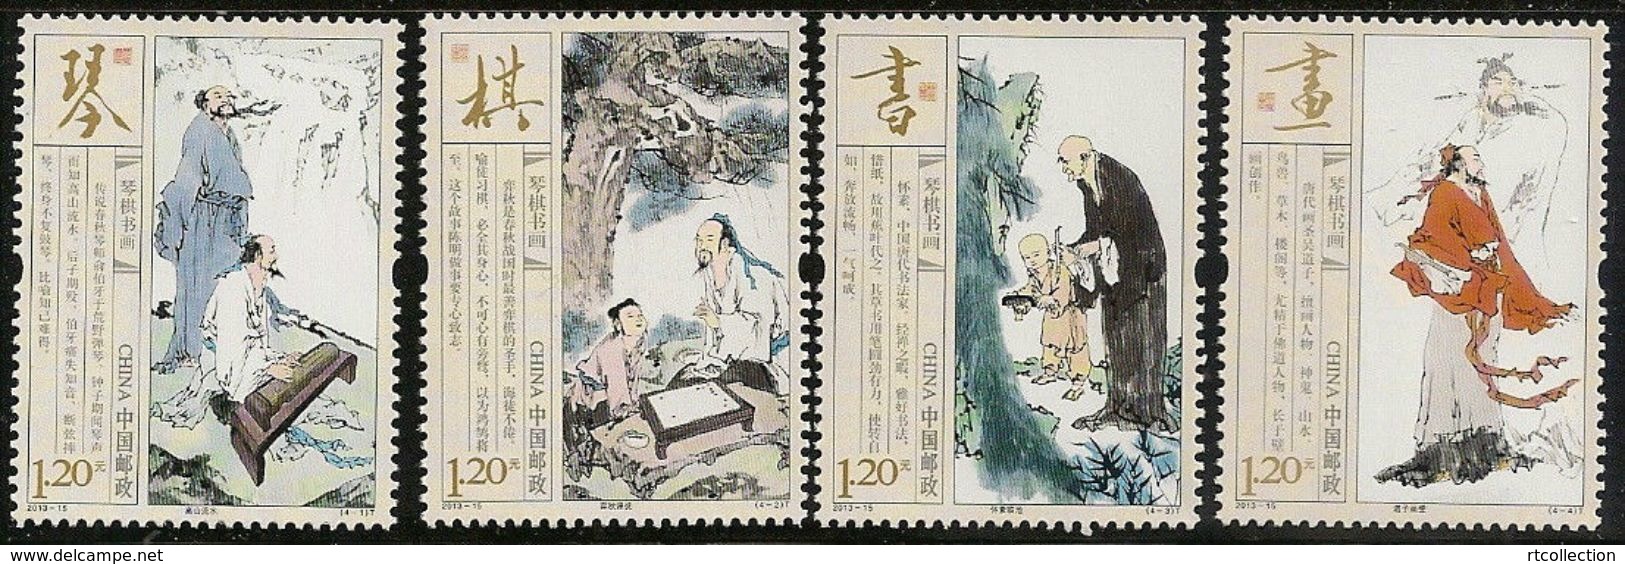 China 2013 Chinese Scholars Lyre-Playing Chess Calligraphy Paintings Piano Music Art Games Stamps 2013-15 Mi 4490-4493 - Chess